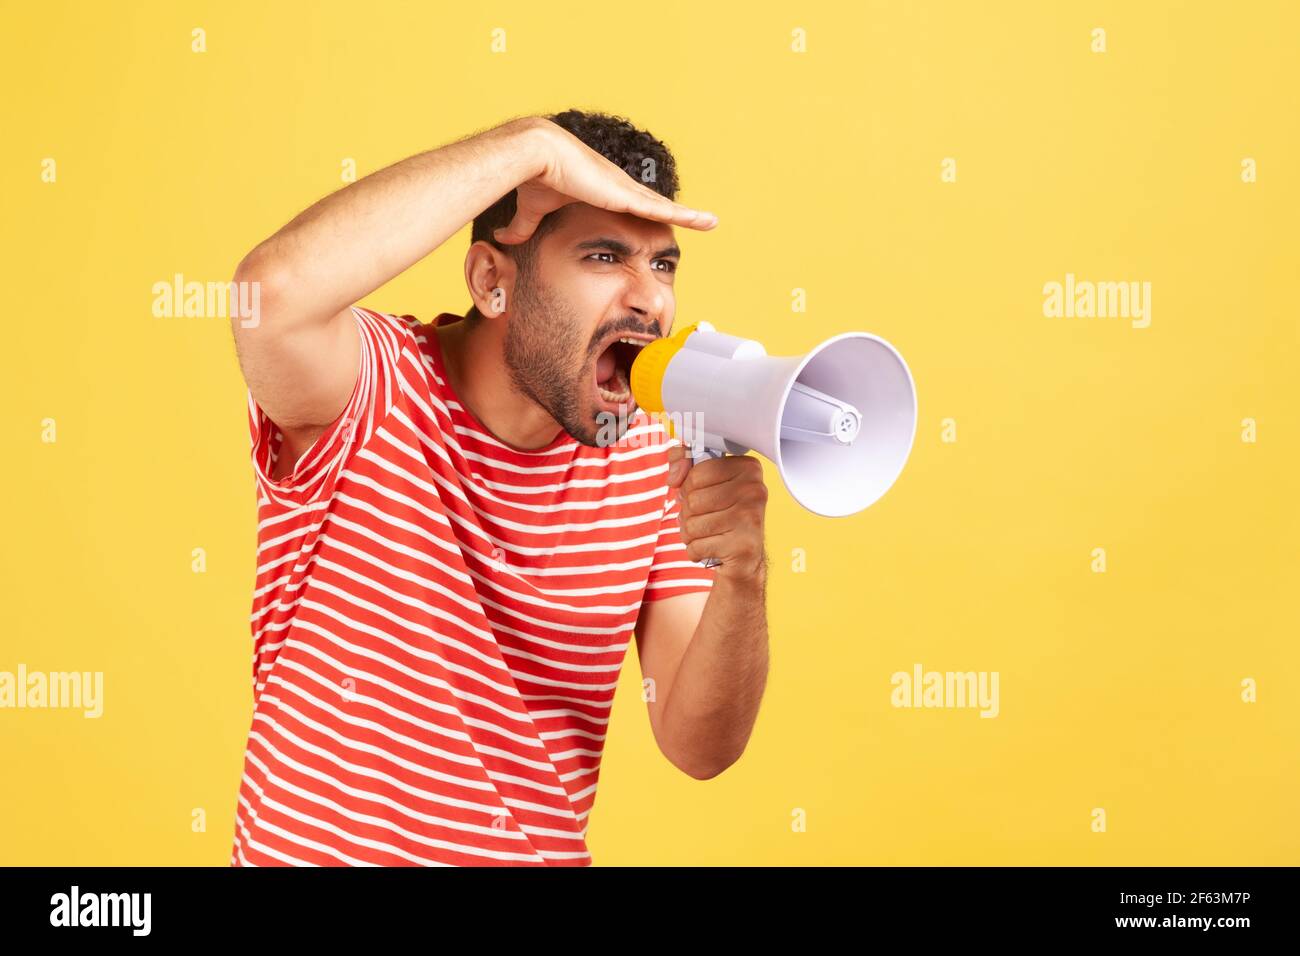 Displeased nervous man with beard in striped t-shirt loudly screaming at bullhorn megaphone holding hand on forehead and looking at distance, swearing Stock Photo